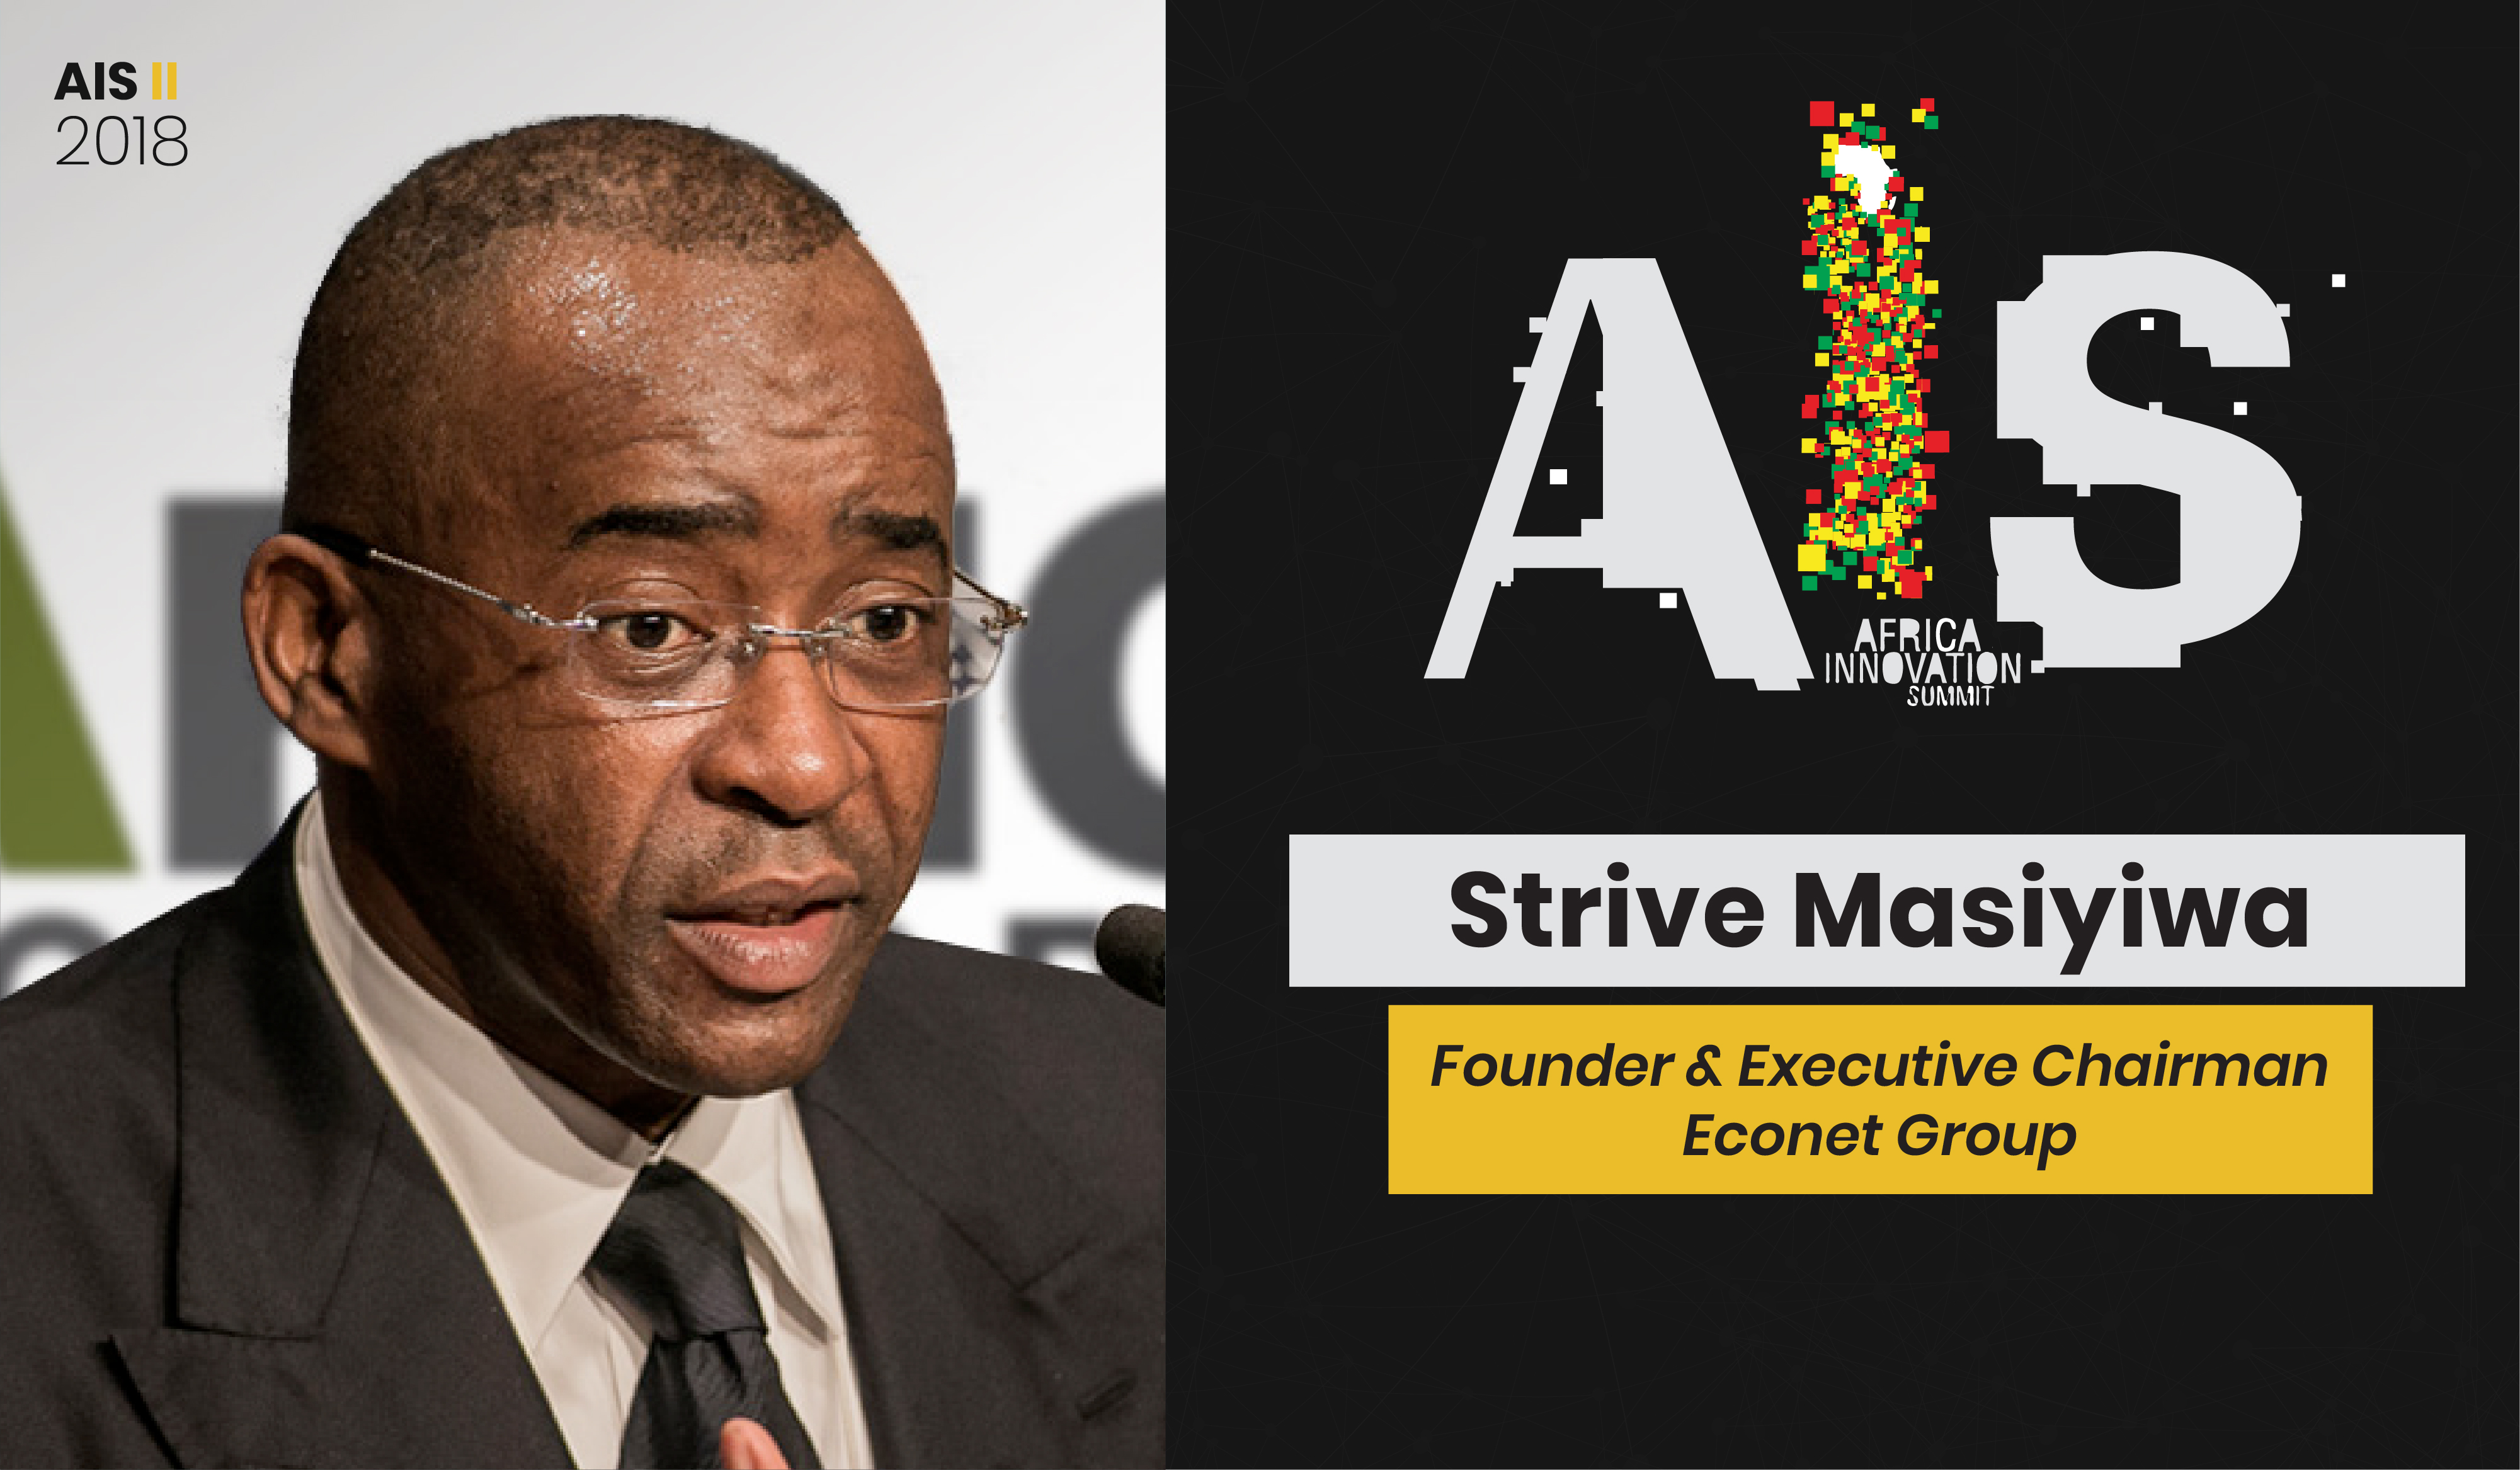 @StriveMasiyiwa, Founder & Executive Chairman of Econet Group confirmed participation to @AIS2018